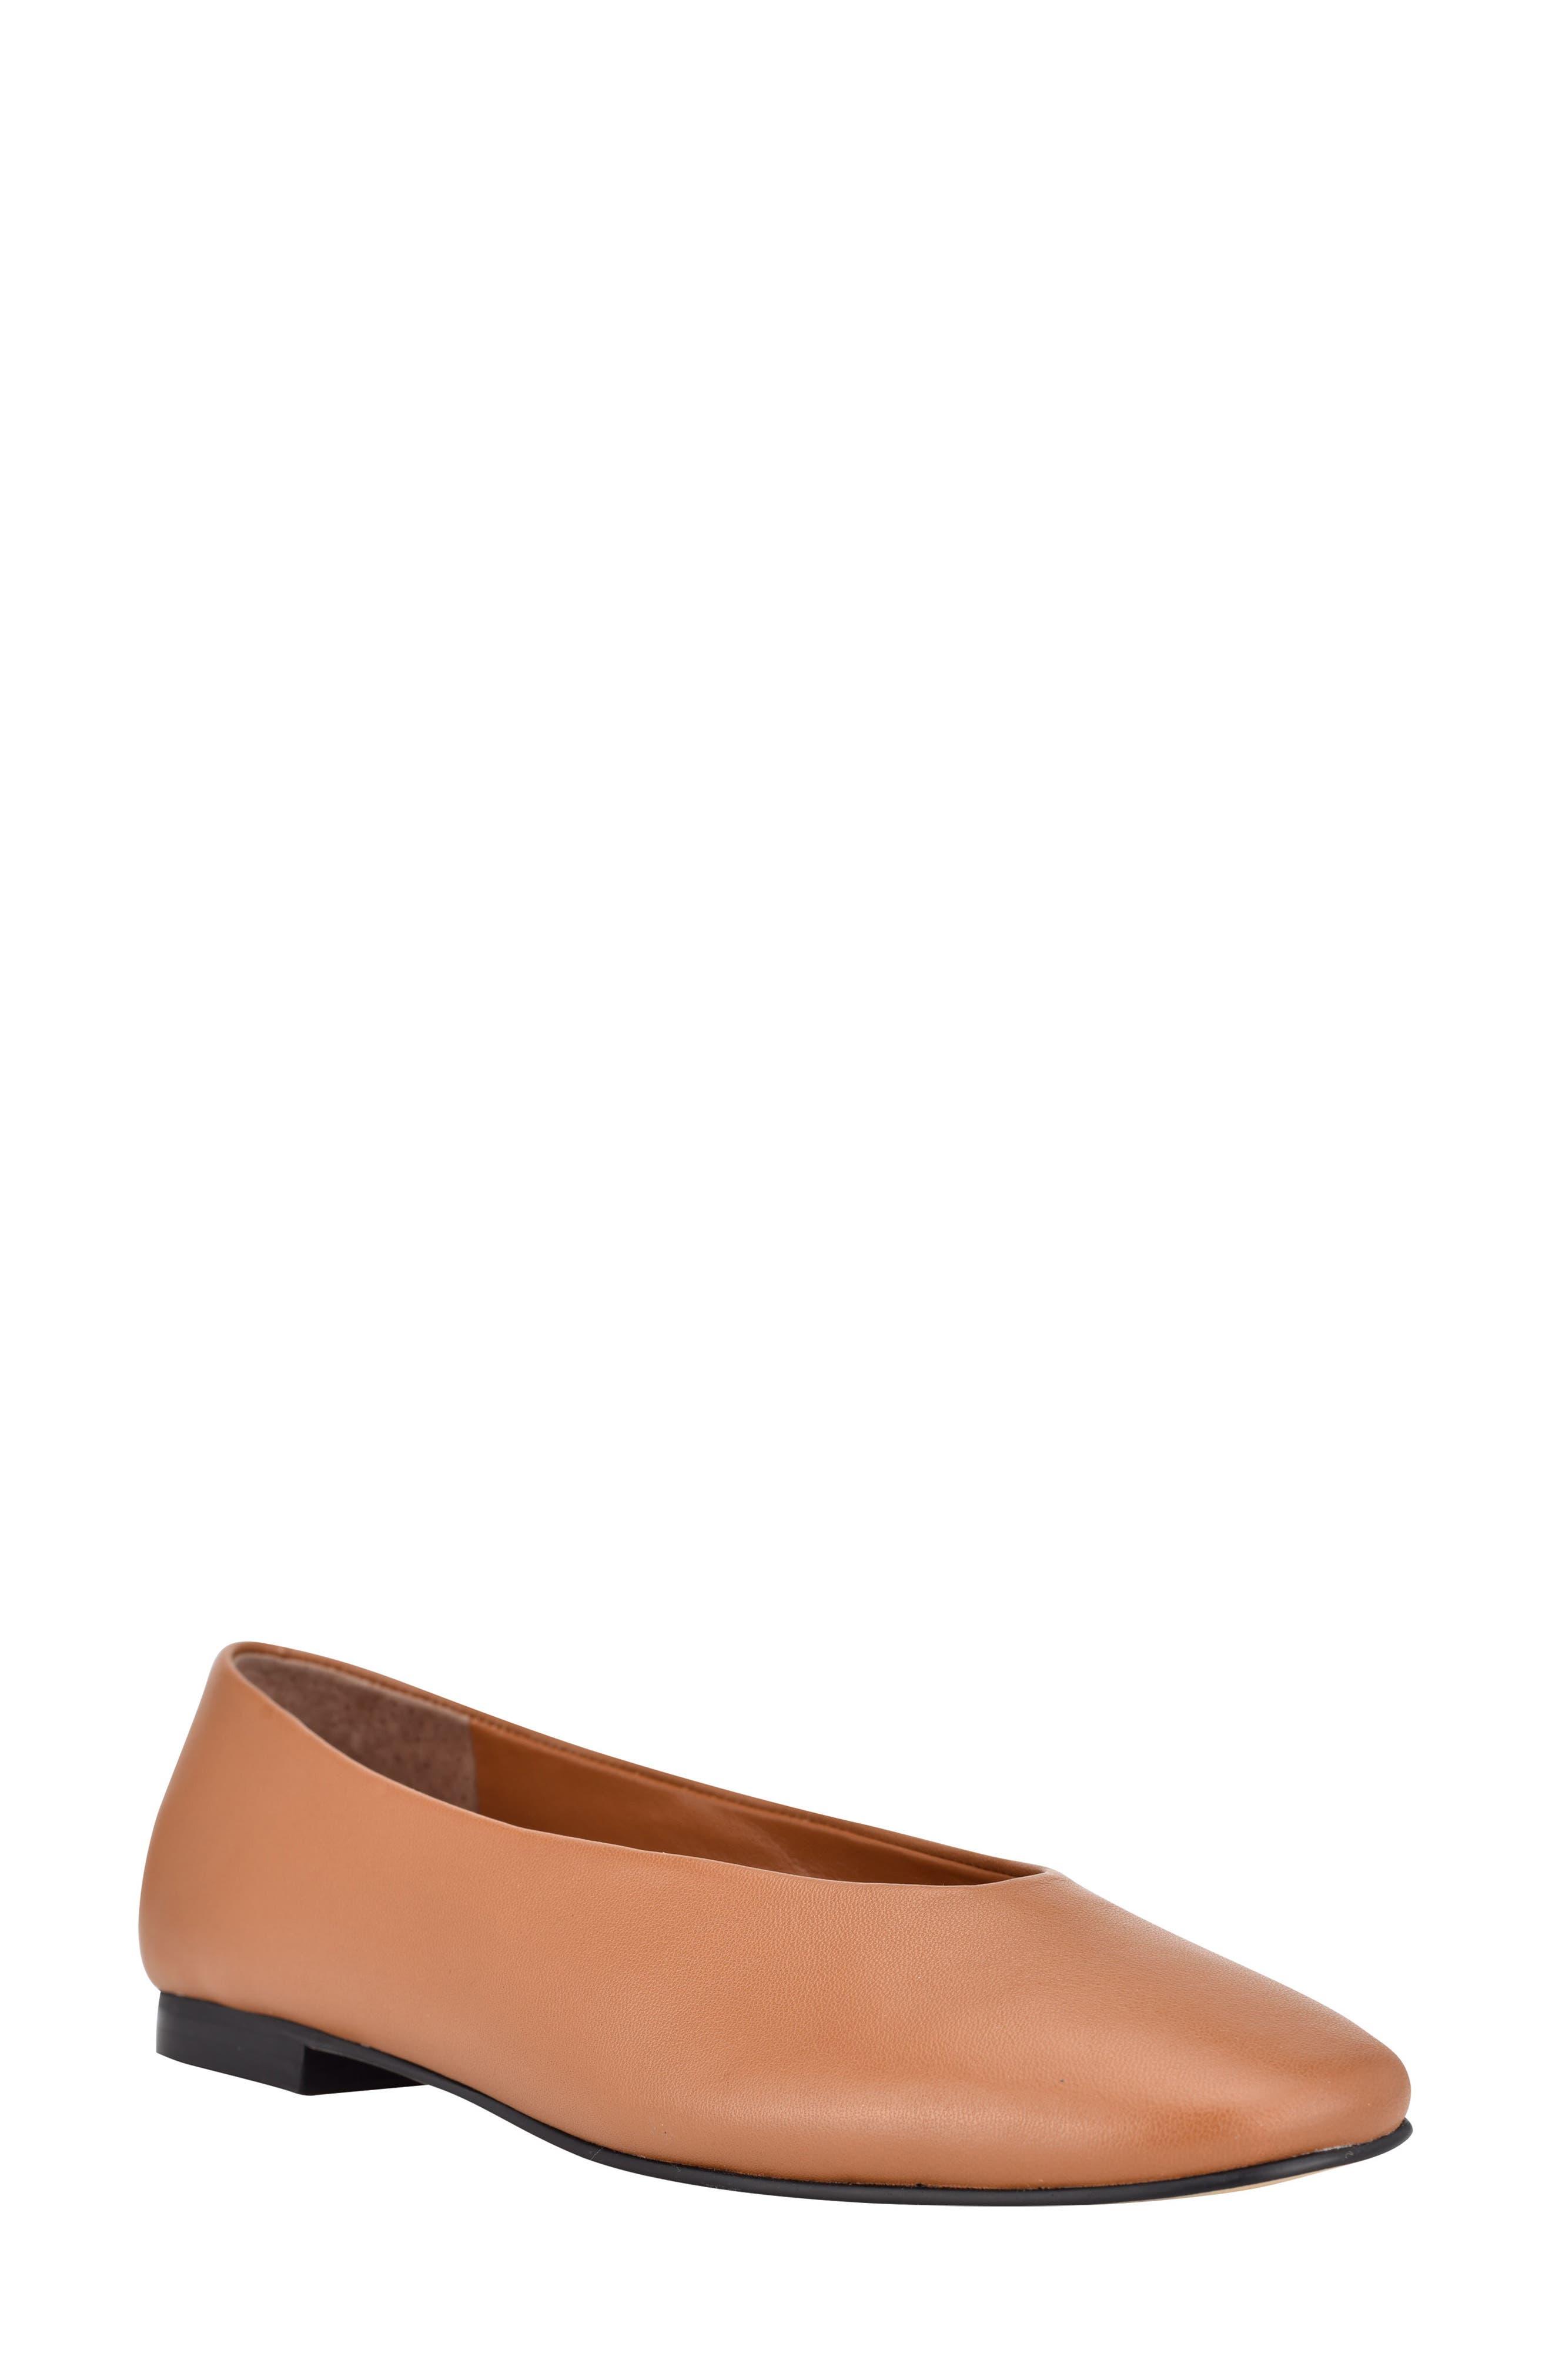 Calvin Klein Anete Flat In Brown Leather At Nordstrom Rack | Lyst